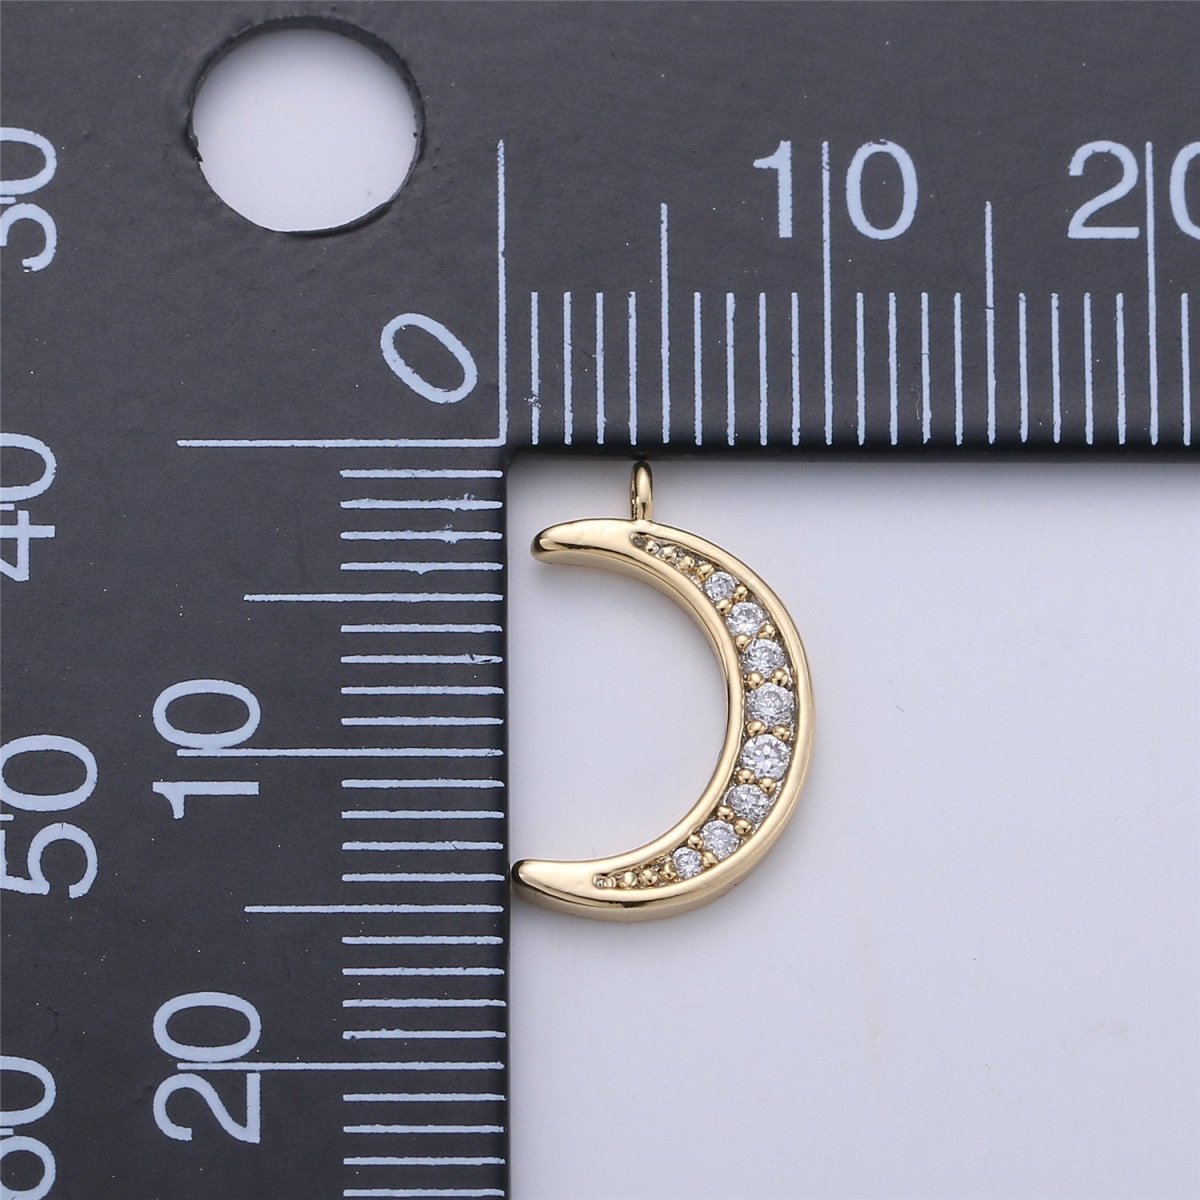 Micro Pave Moon Dainty Crescent Moon Charm Small Moon Pendant 18K Gold Filled Celestial Necklace Earring Bracelet Charm Jewelry MakingC-615 - DLUXCA